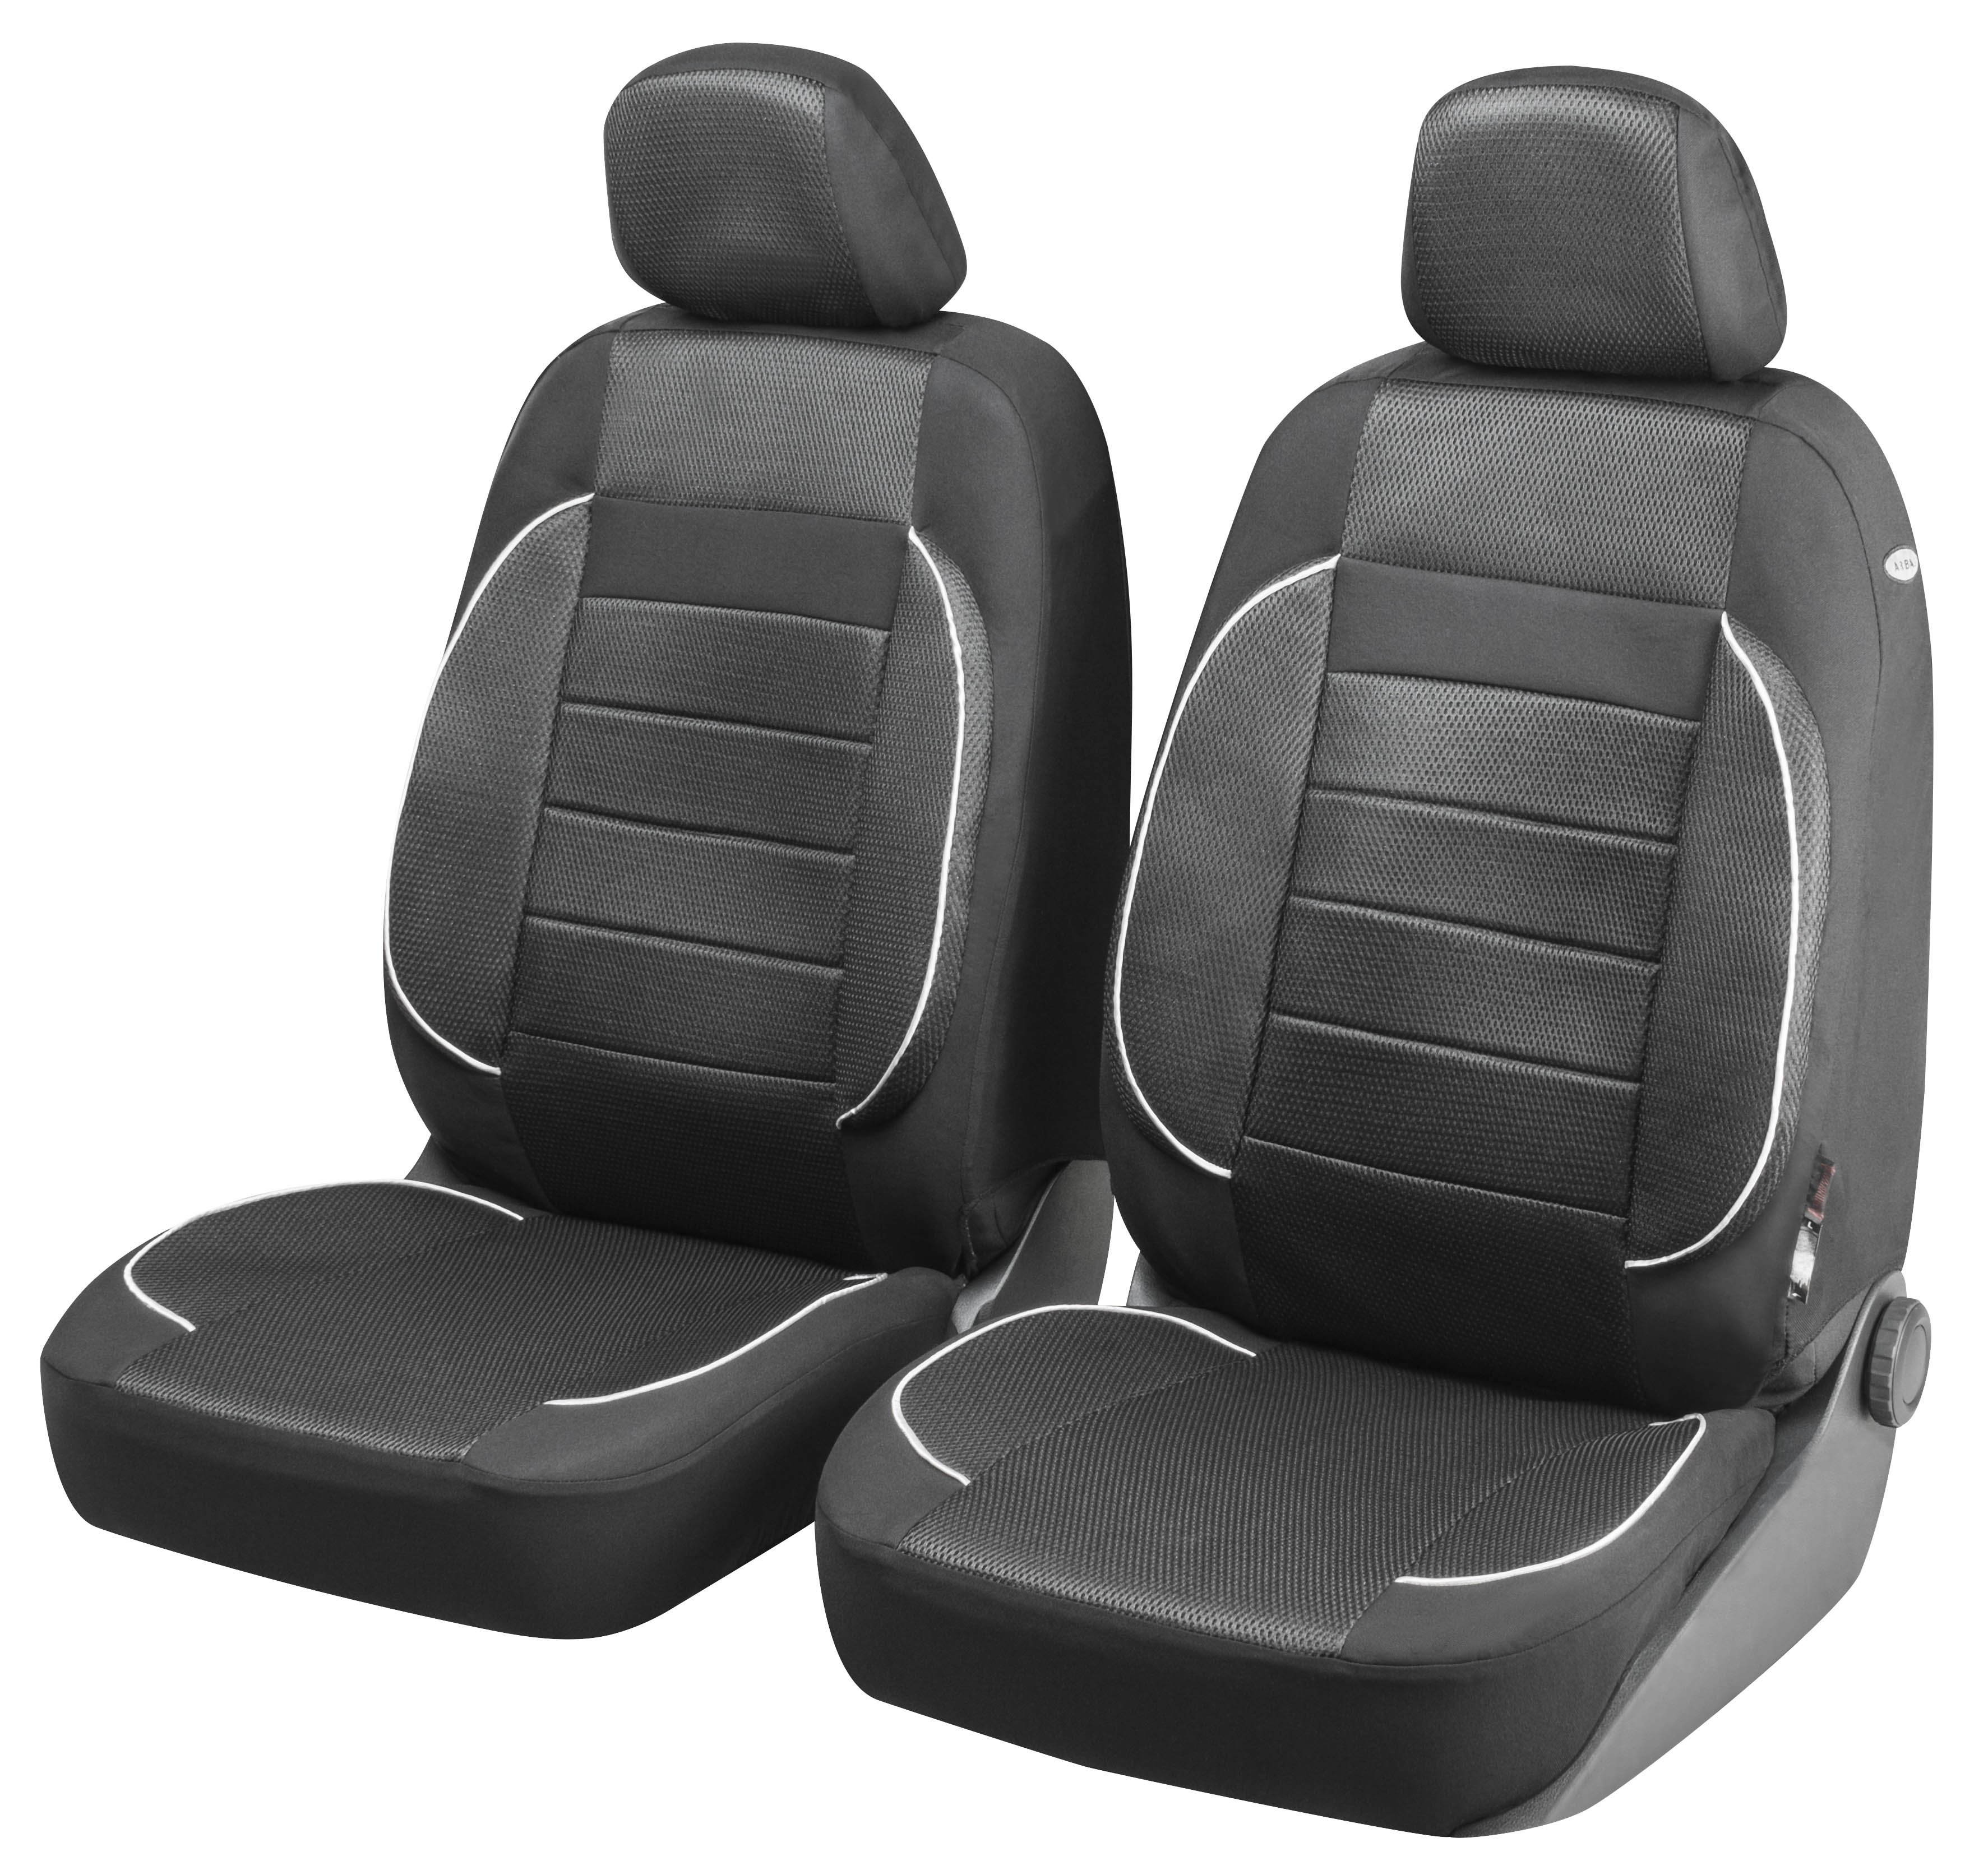 ZIPP IT Premium Rover Car Seat covers for two front seats with zipper system